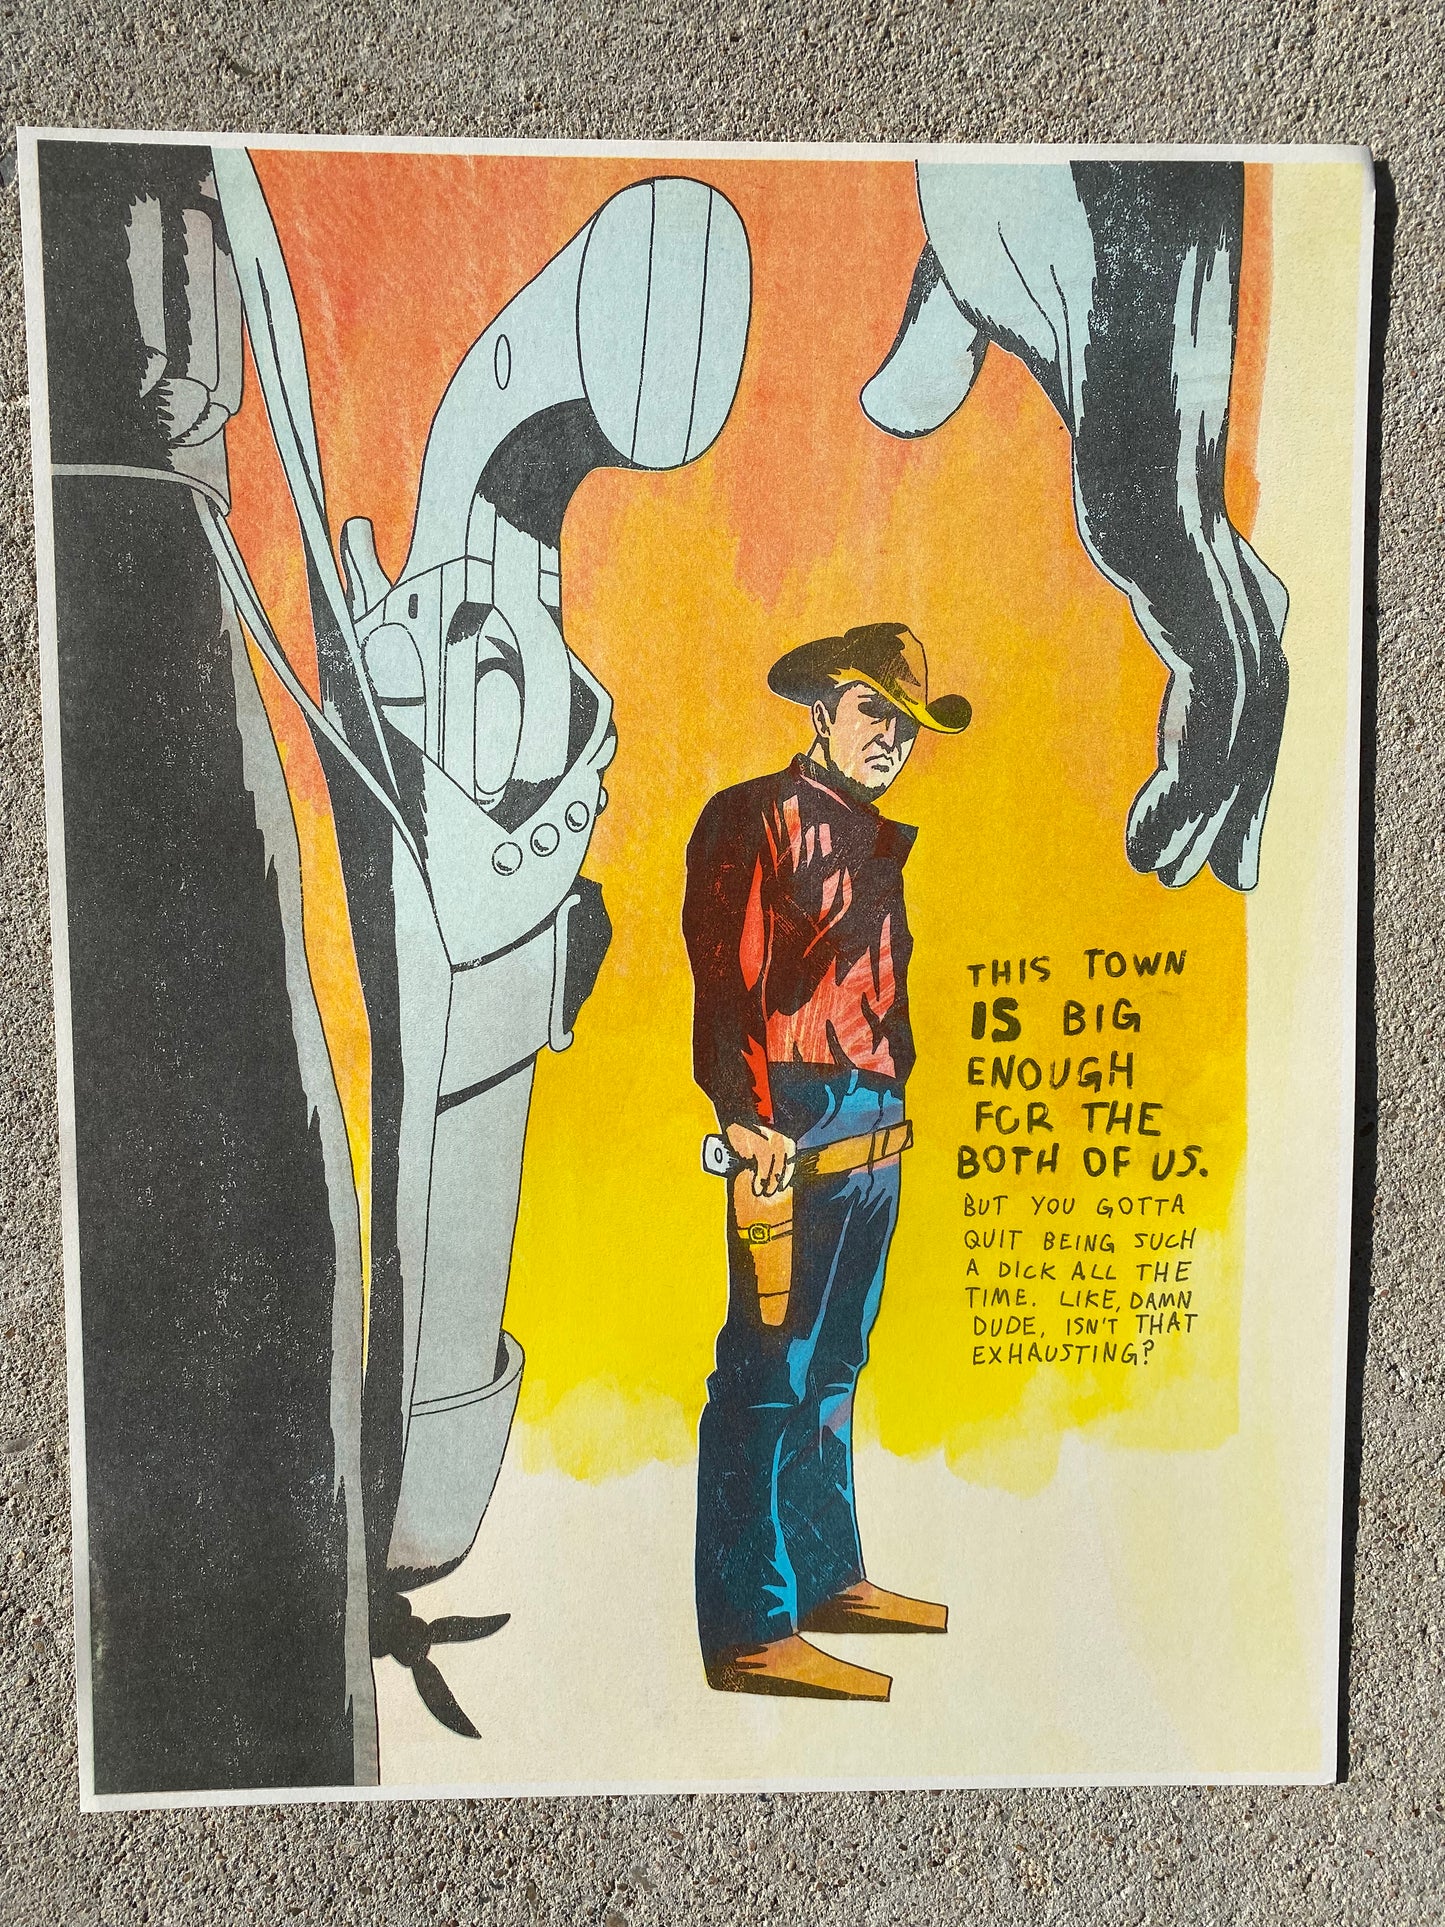 A print of a pistol and a hand near it with a Cowboy in the distance with his hand on his pistol.  Cowboy is wearing a red shirt, blue jeans, tan boots and hat.  To the right of the cowboy it reads "this town is big enough for the both of us. But you gotta quit being such a dick all the time like damn dude isn't that exhausting?"